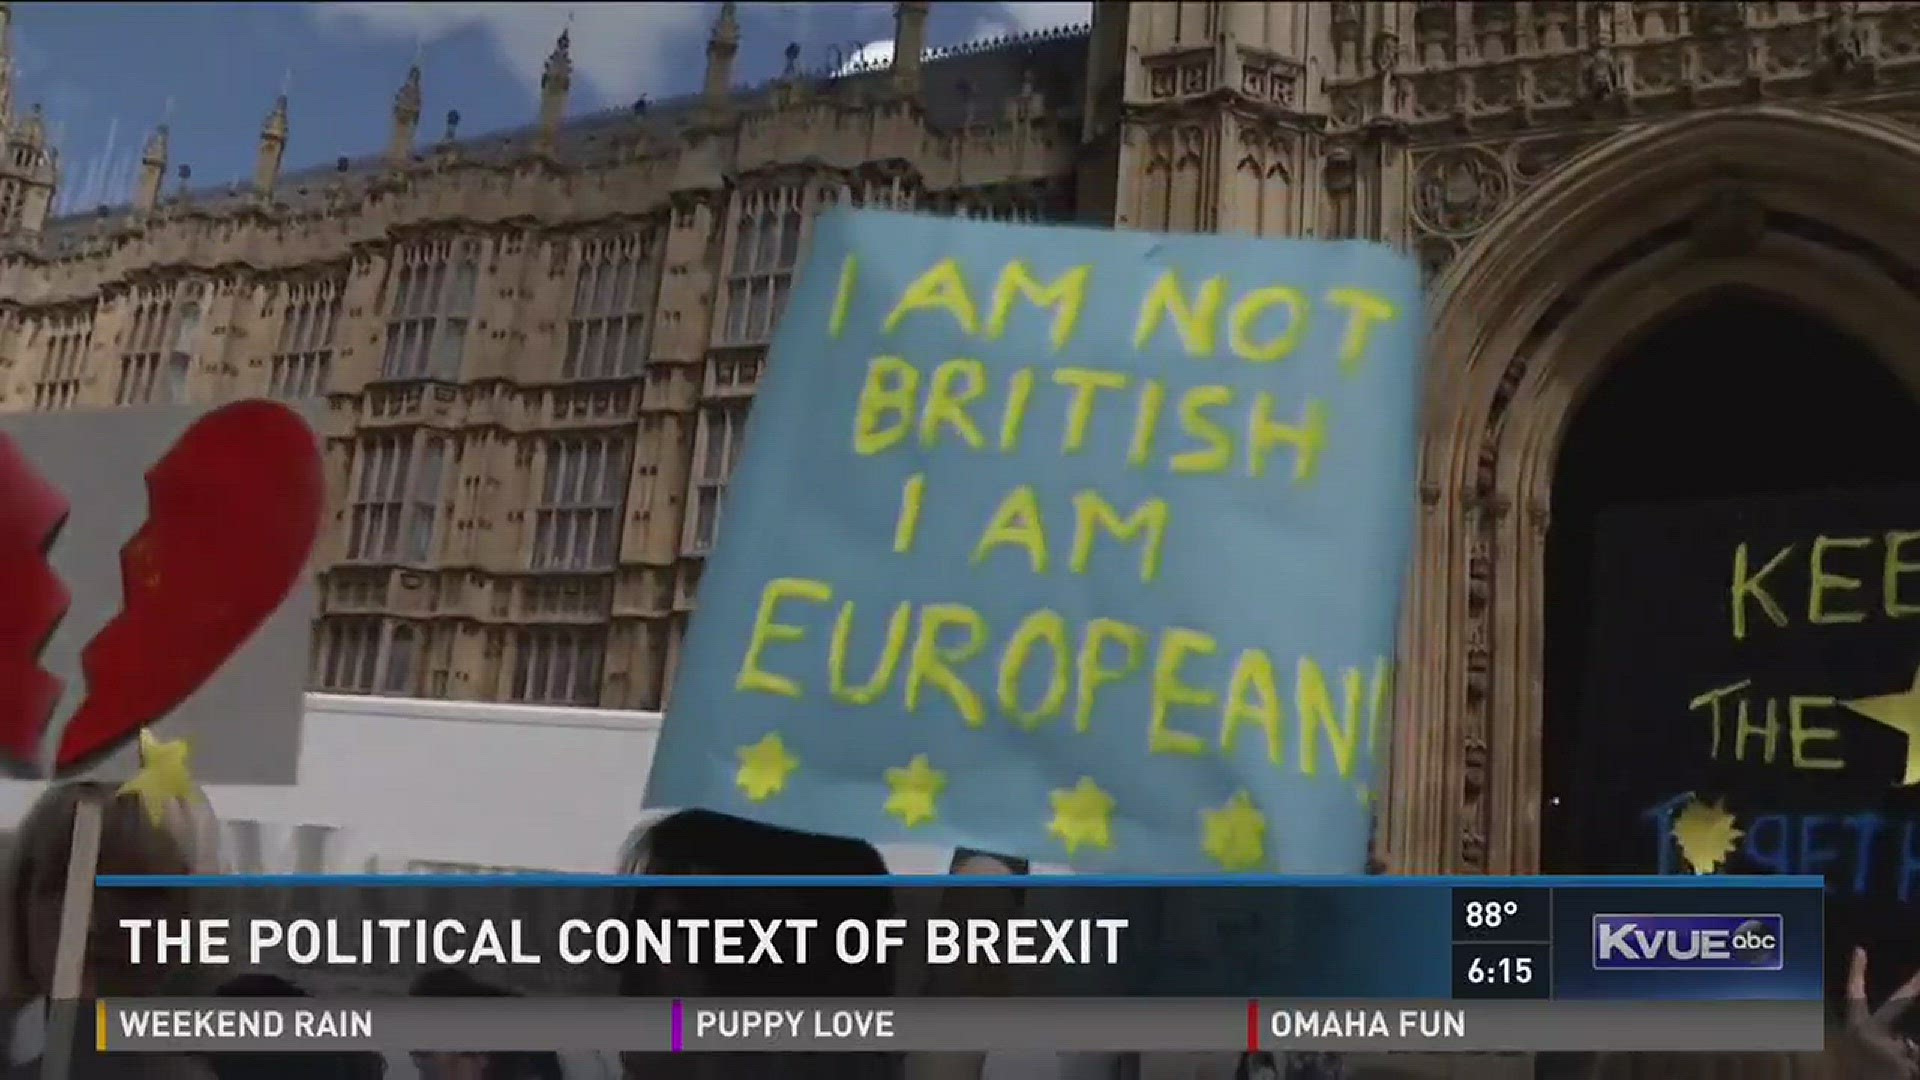 The political context of Brexit